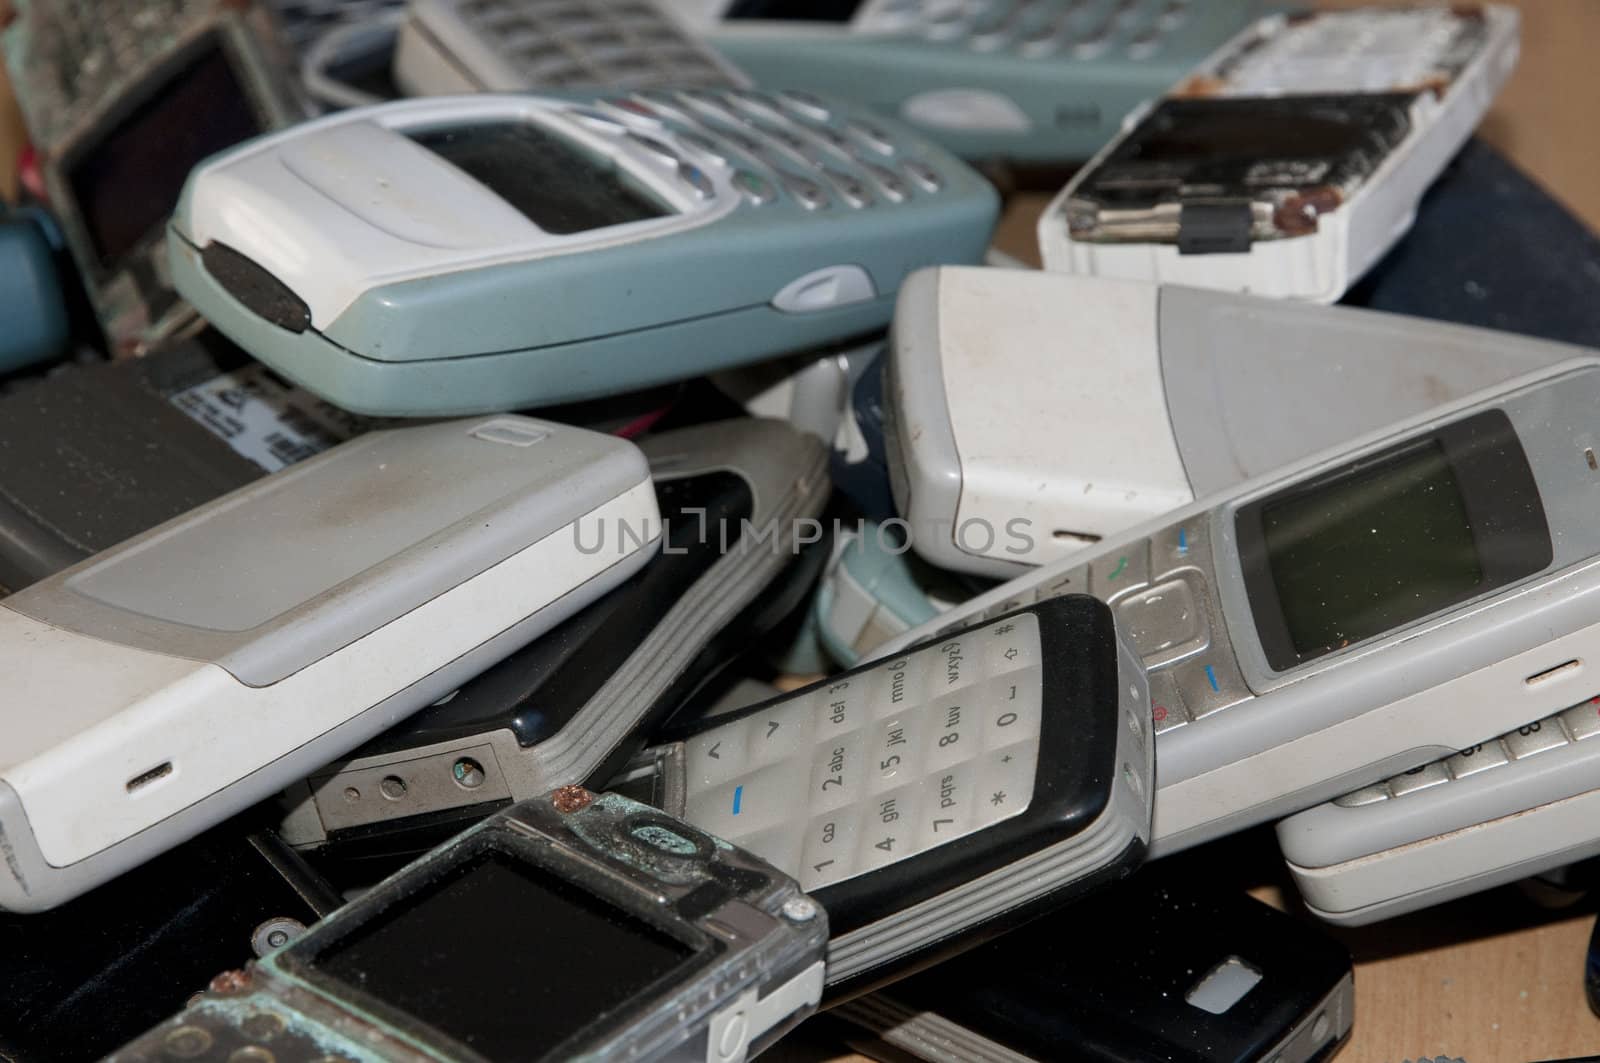 Many old mobile phone in a sort of graveyard